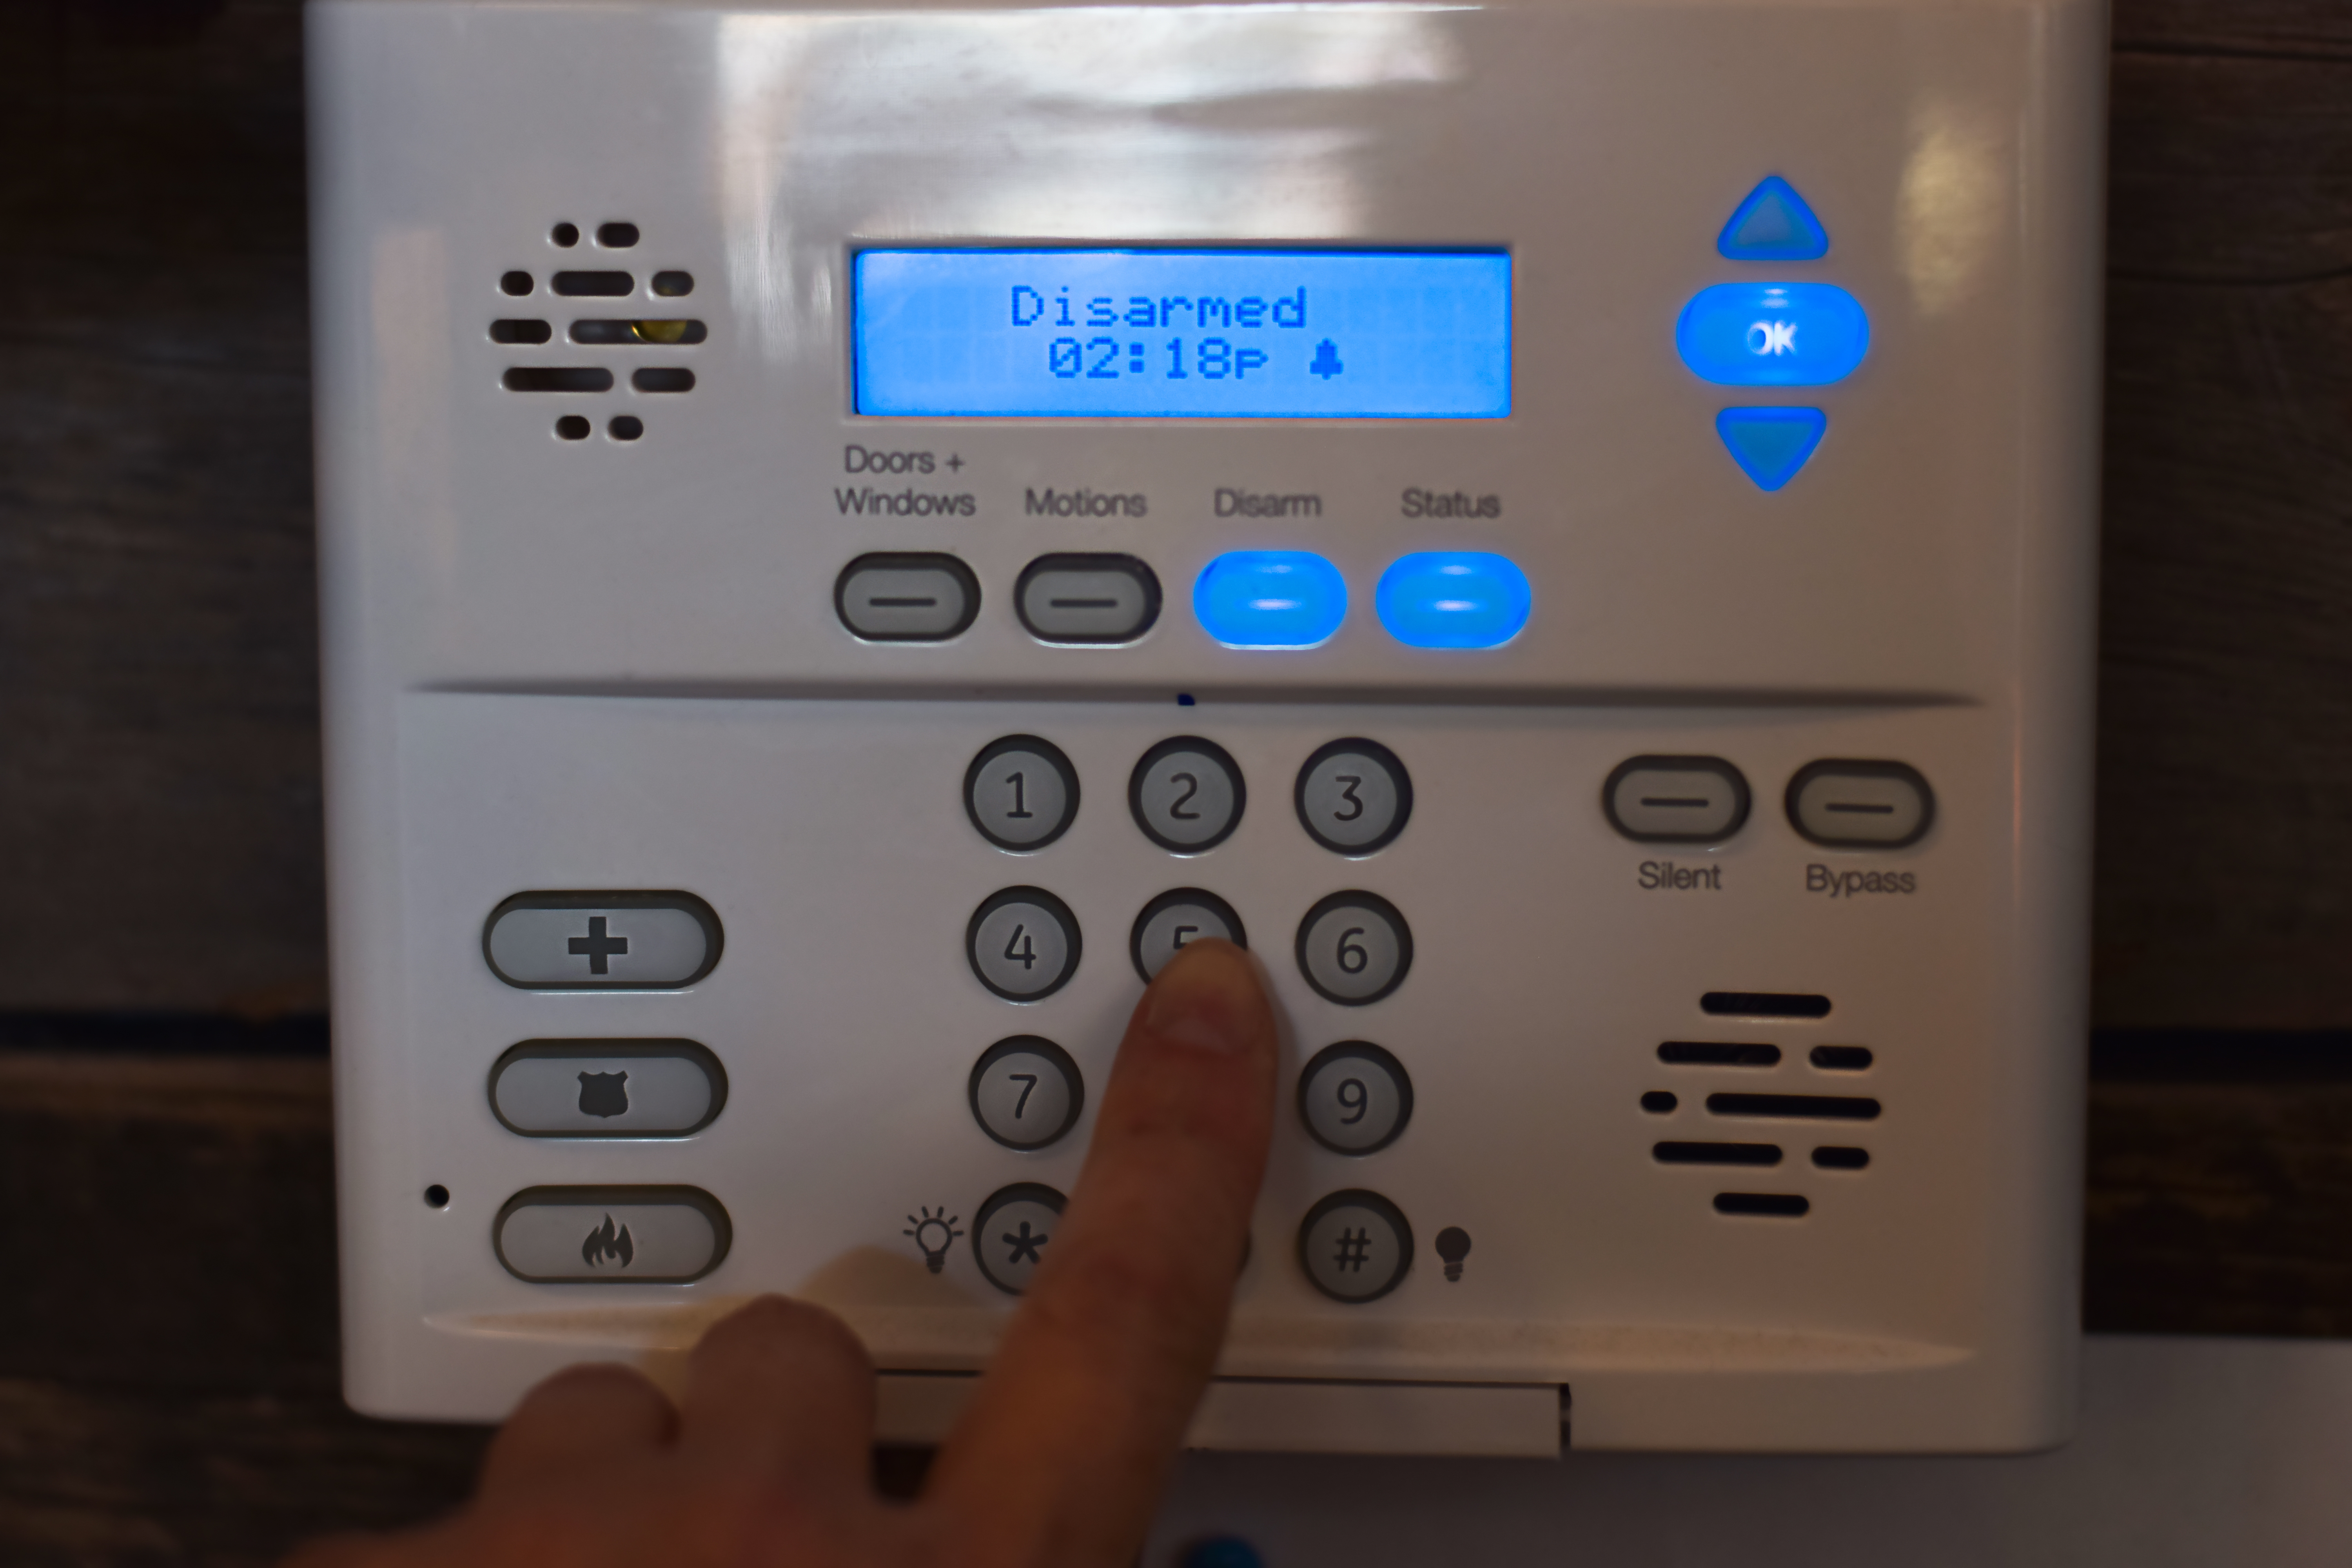 Simplisafe Home Security System in Fresno California | Home Security Devices